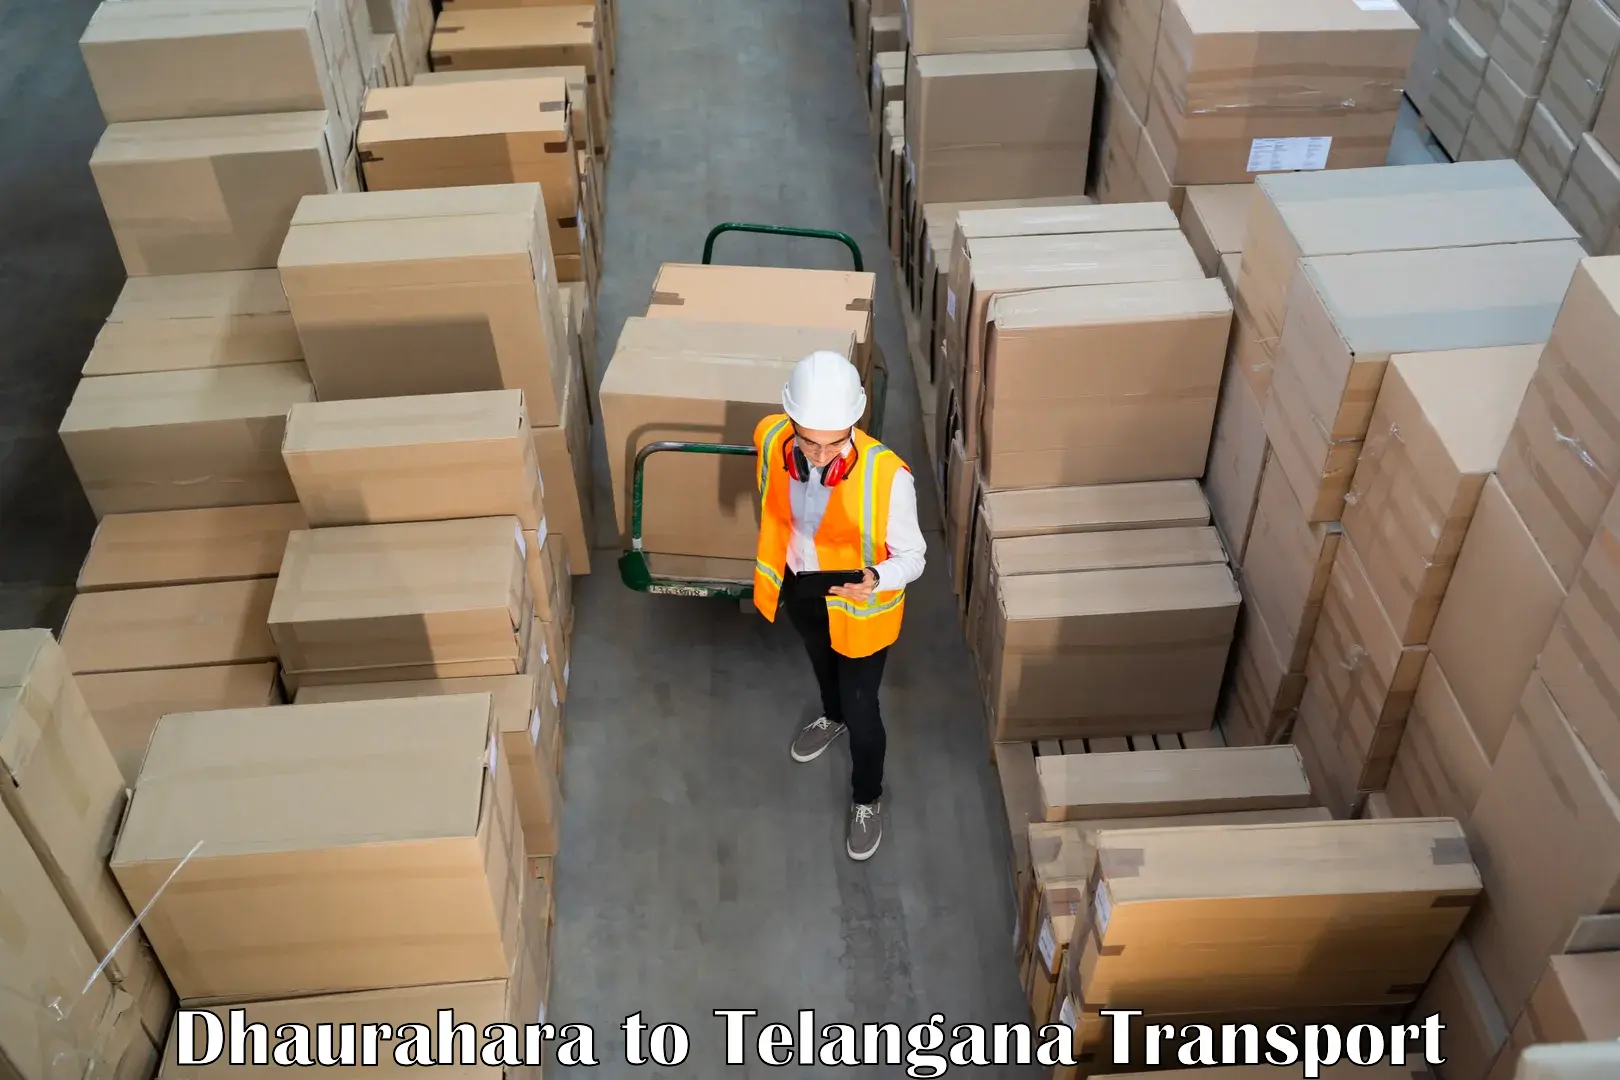 Truck transport companies in India Dhaurahara to Allapalli